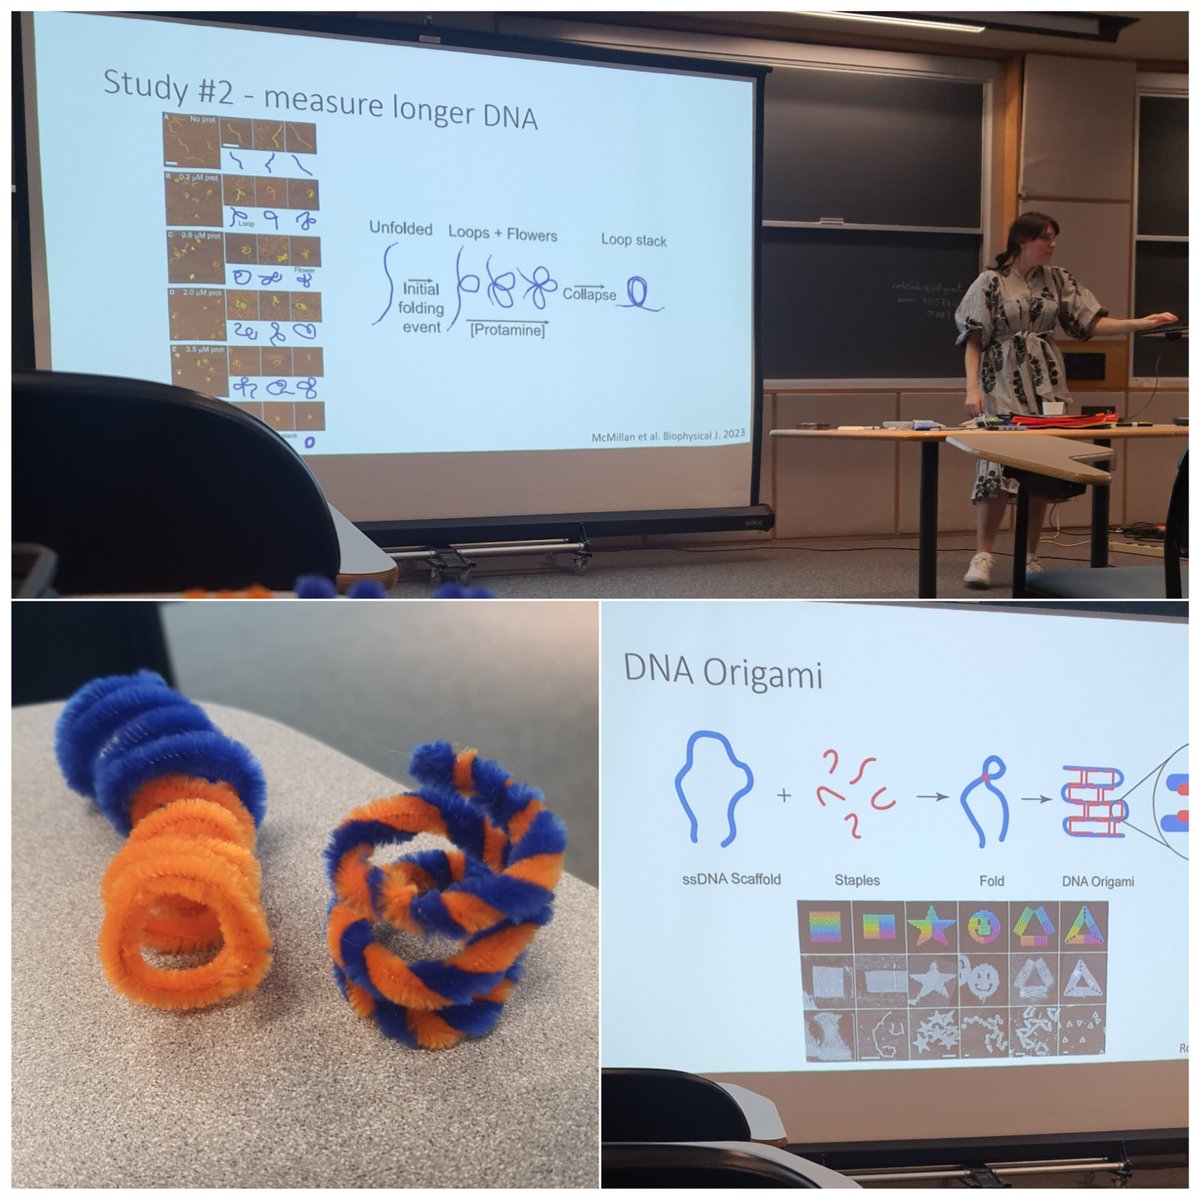 For today's @UMassPSE Seminar, hosted by Prof. Crosby, we had a fun and fascinating talk by Prof. Ashley Carter from Amherst College, teaching us about the physics of DNA folding! 🧬🪢#physics #teamsmileyface #teammonalisa